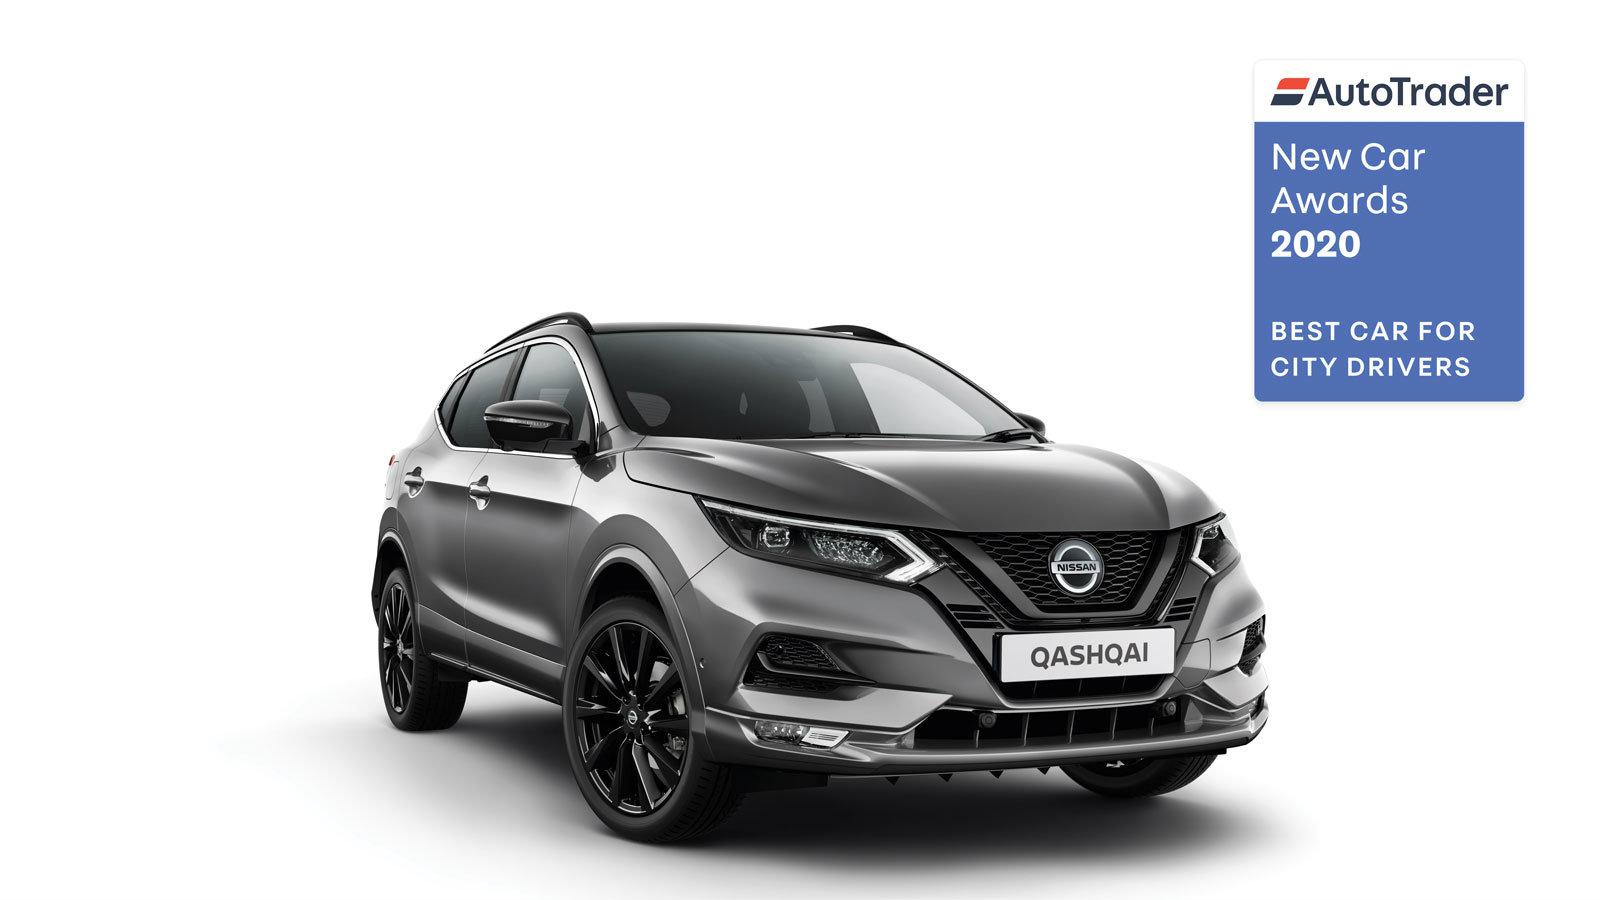 To Nissan QASHQAI ανακηρύχθηκε «Best Car for City Drivers» 